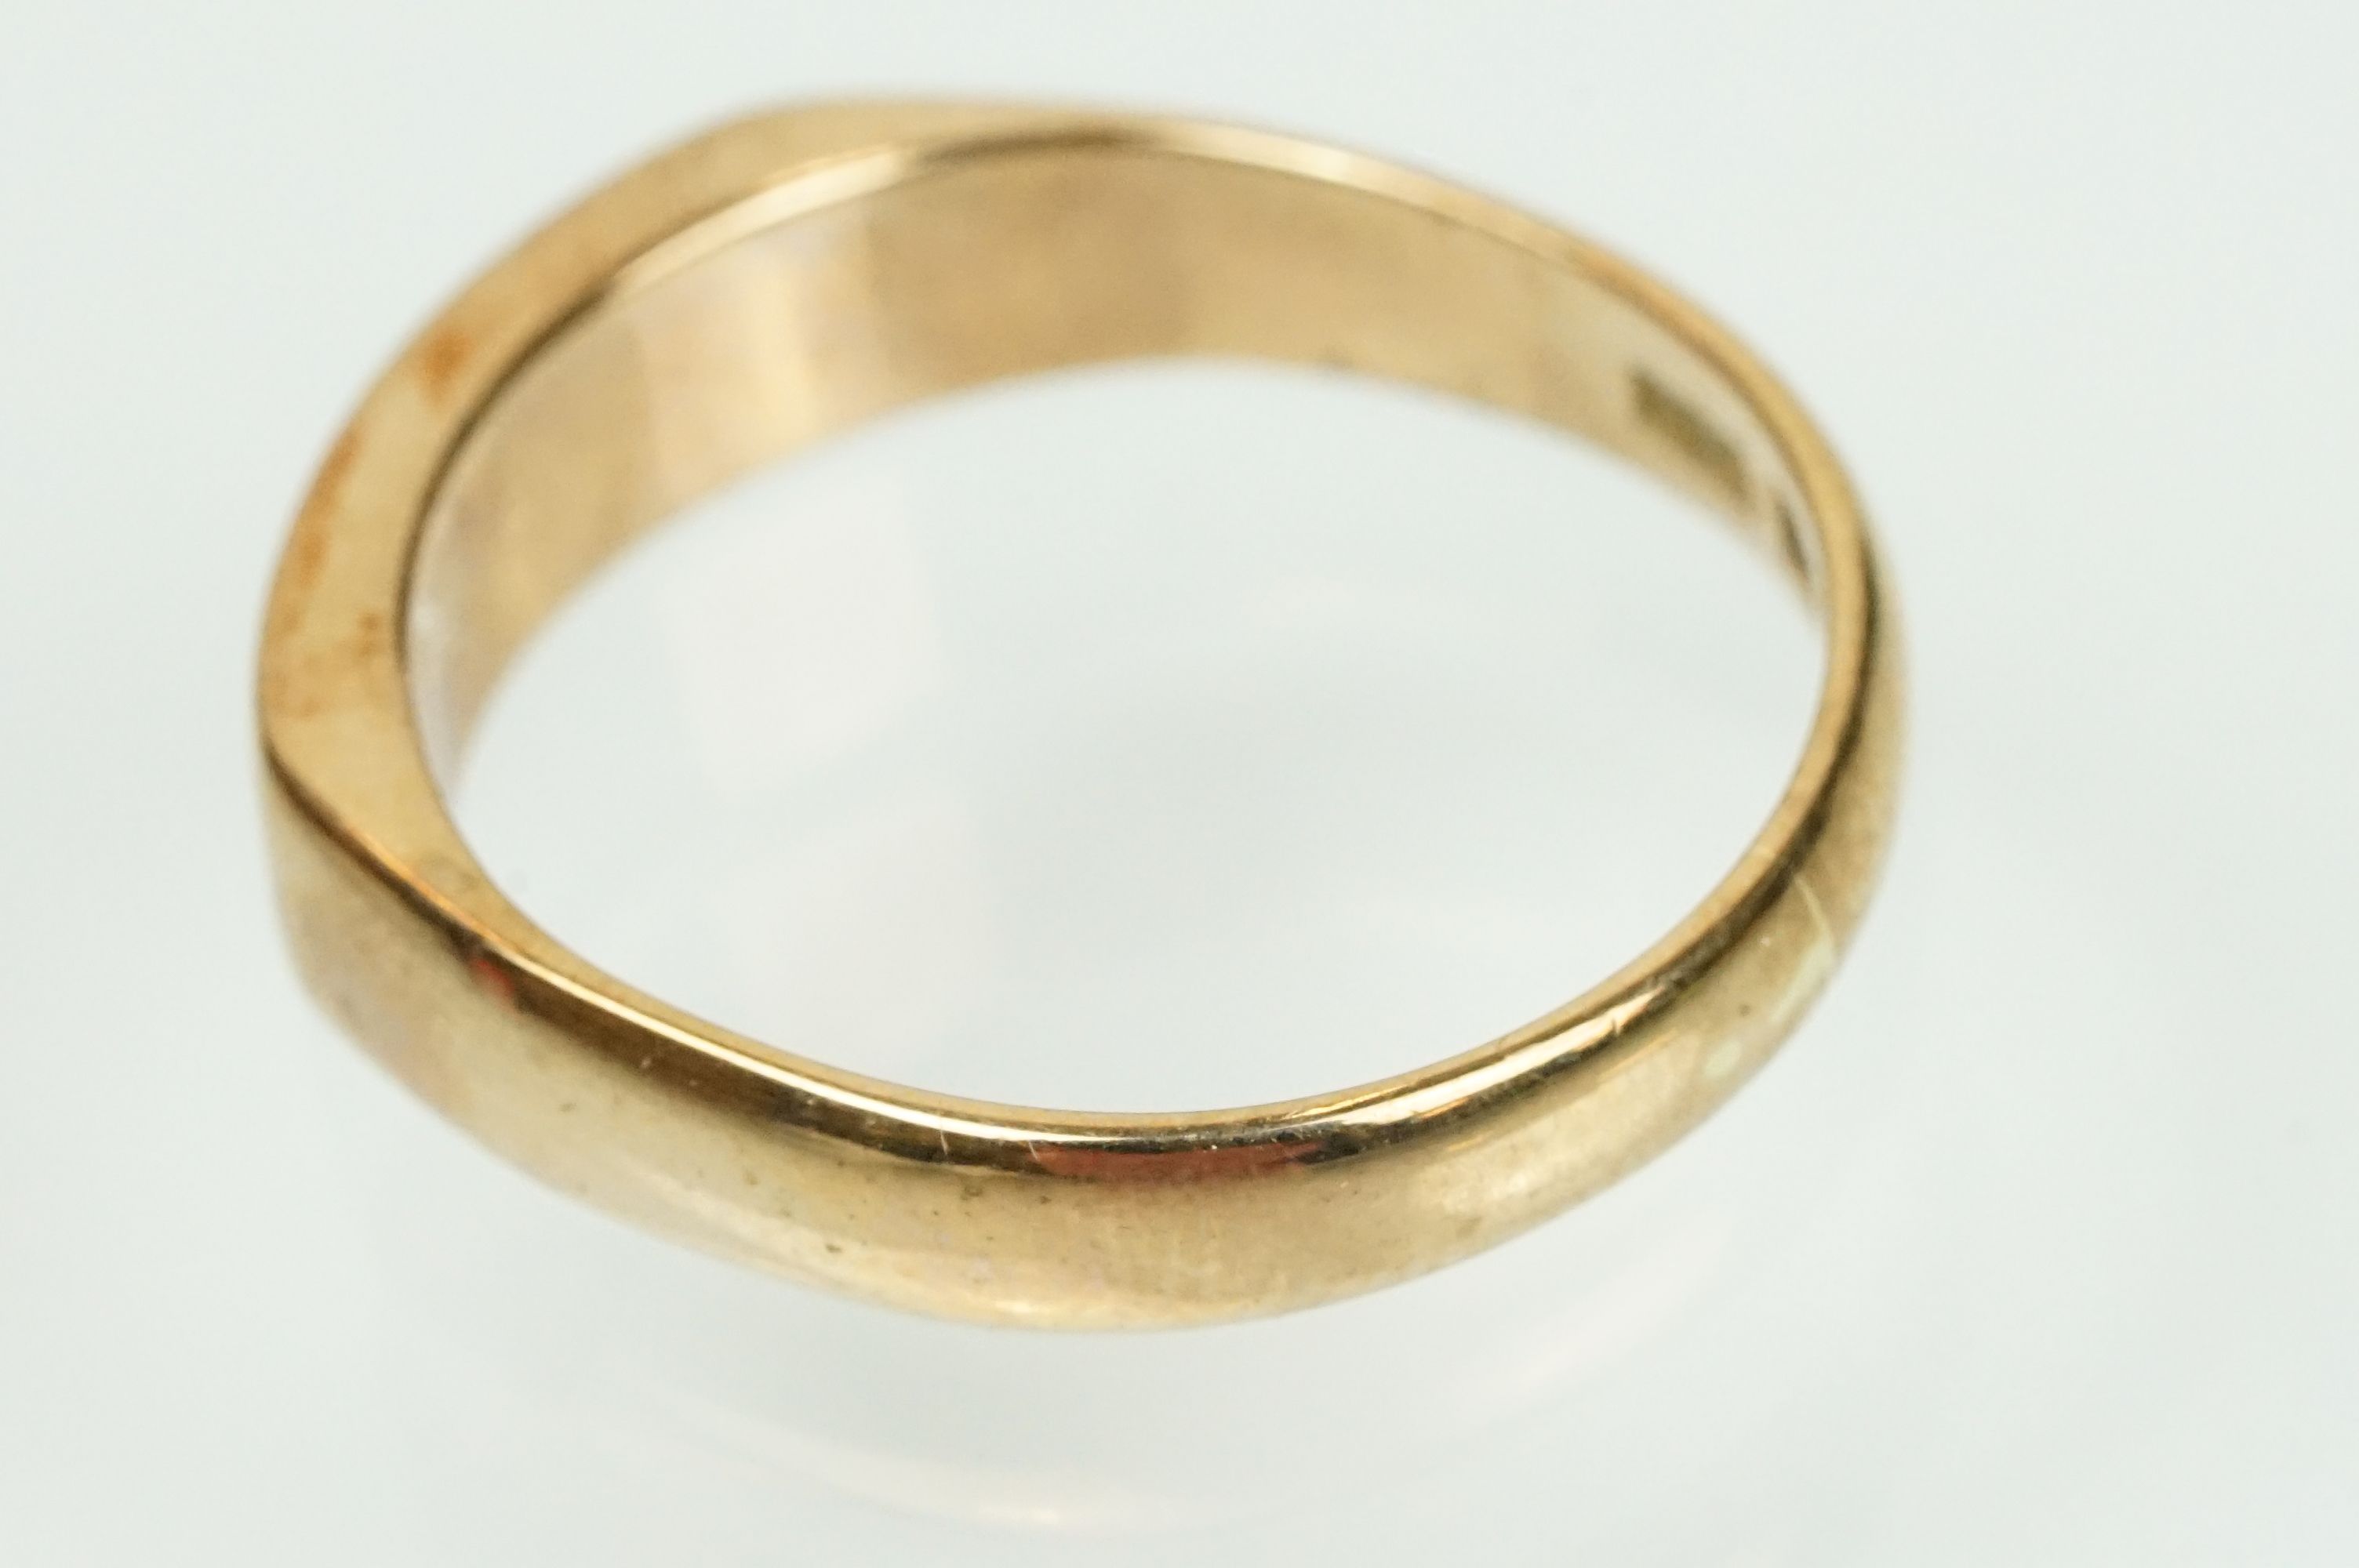 9ct gold band ring with flat head. Marked 375 to shank. Size N.5. - Image 3 of 4